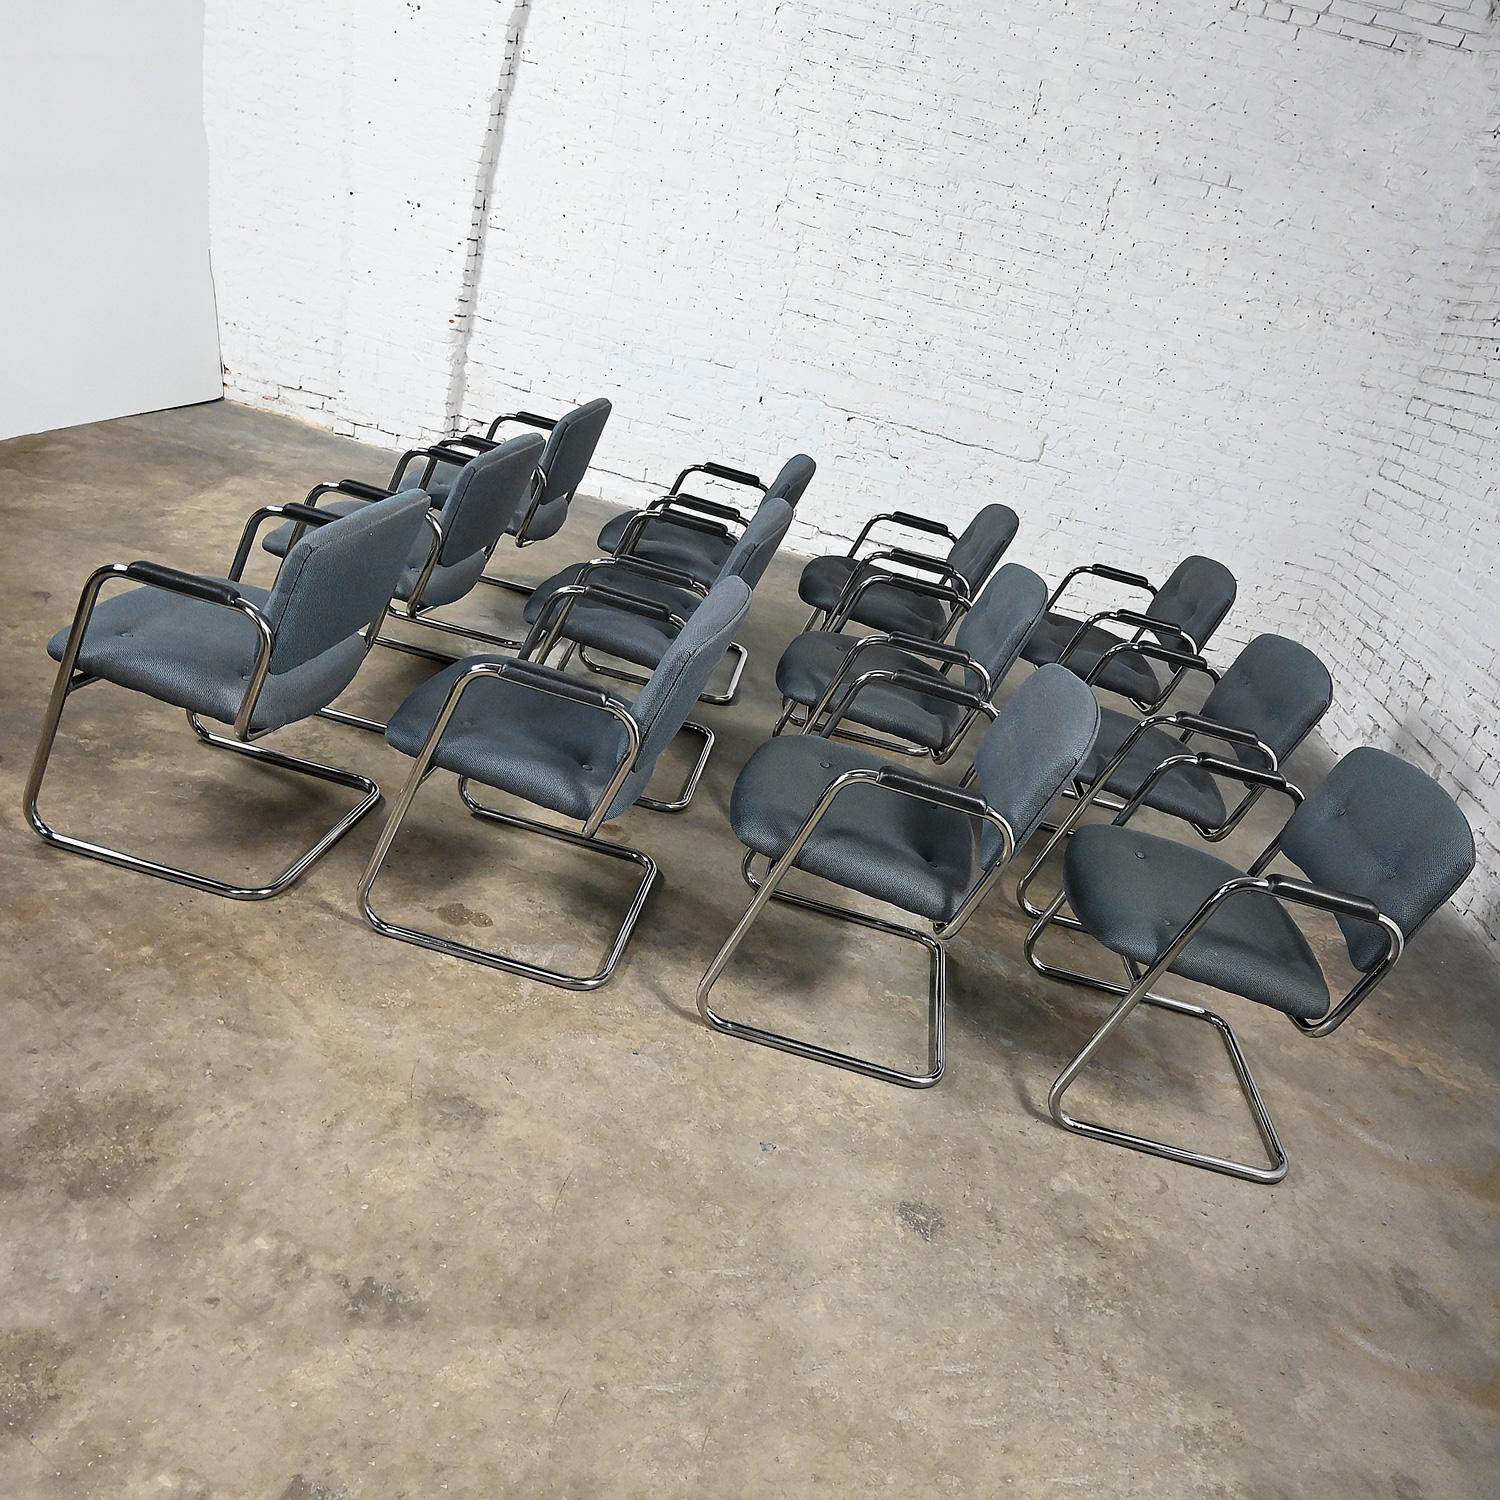 Late 20th Century Gray & Chrome Cantilever Chairs Style Steelcase Set of 12 For Sale 1